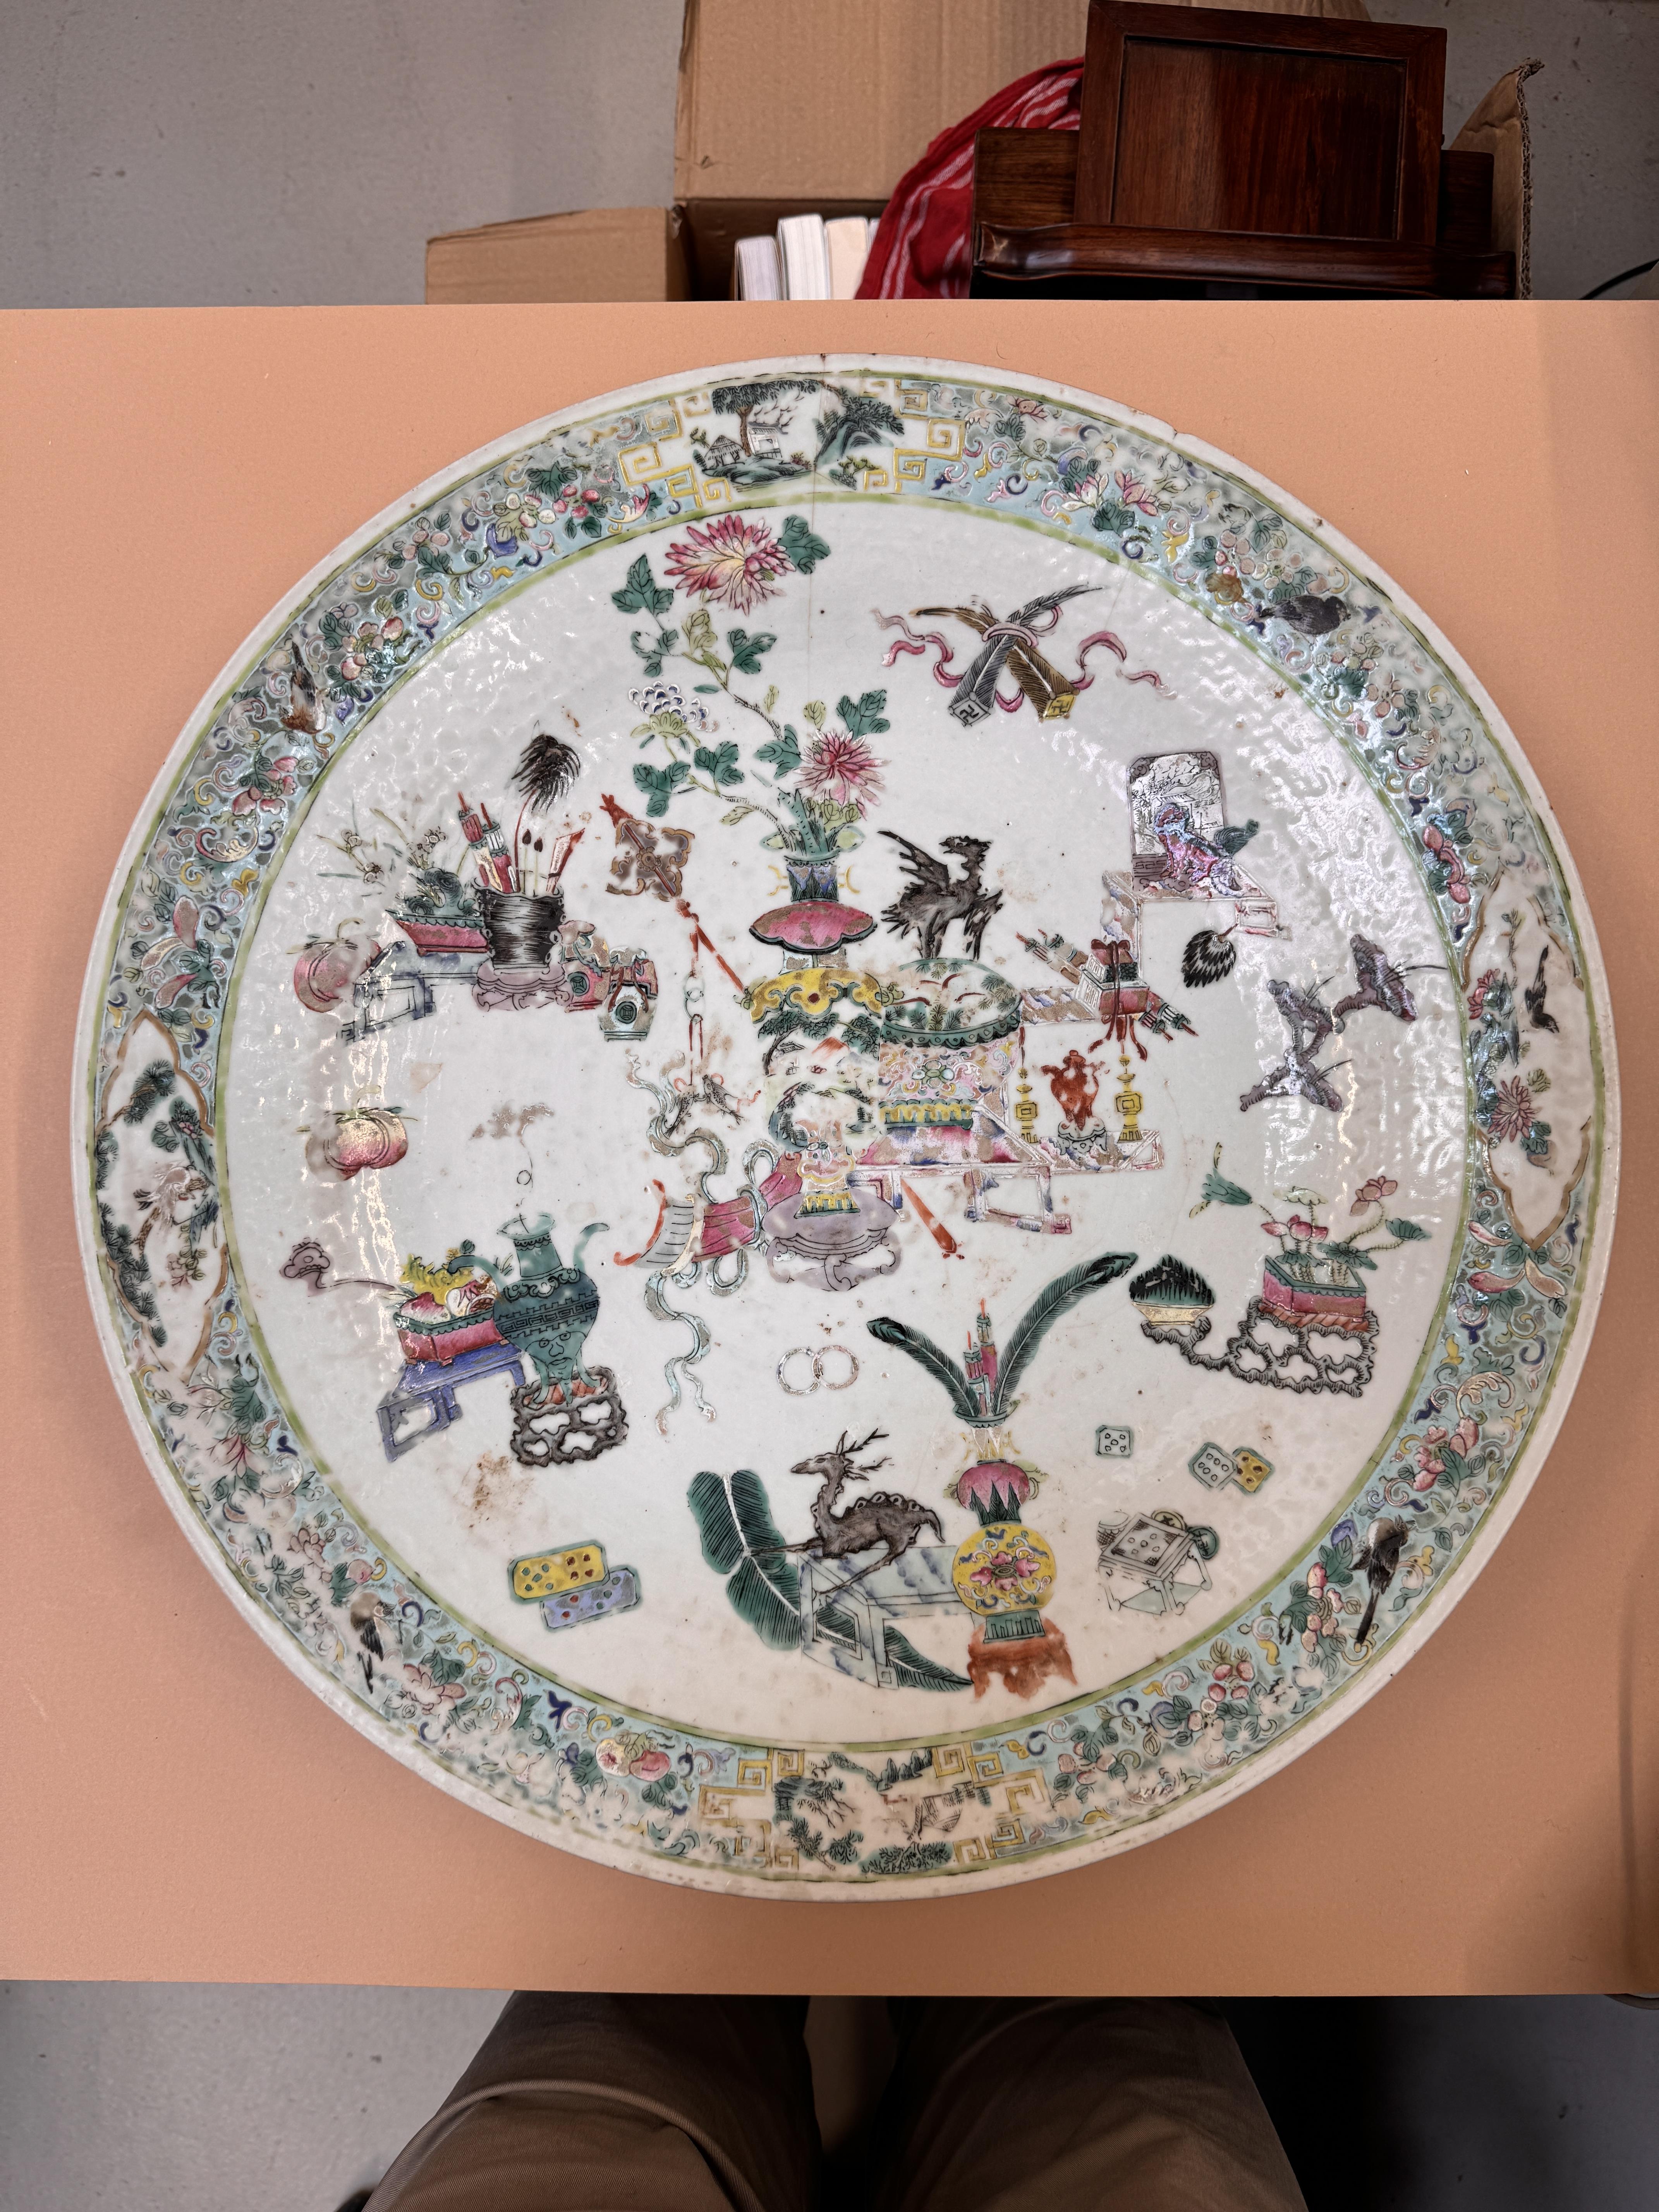 A LARGE CHINESE FAMILLE-ROSE 'HUNDRED ANTIQUES' CHARGER 清十九世紀 粉彩博古圖紋大盤 - Image 7 of 15